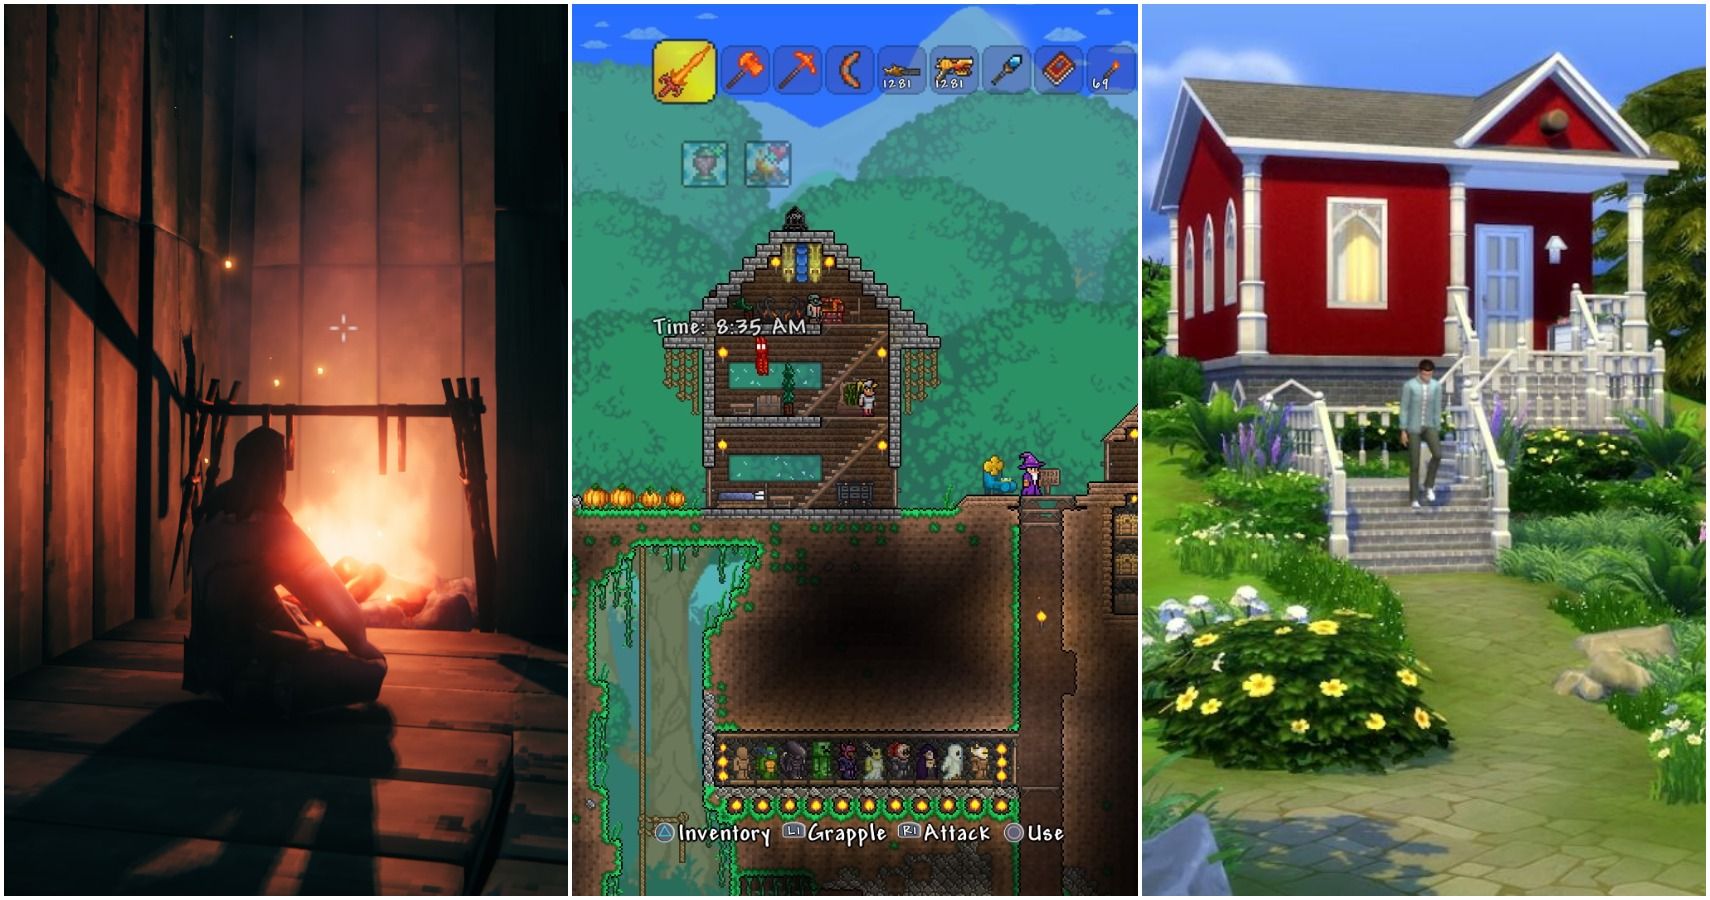 From Valheim To The Sims I Can’t Stop Buying Games That Let Me Build